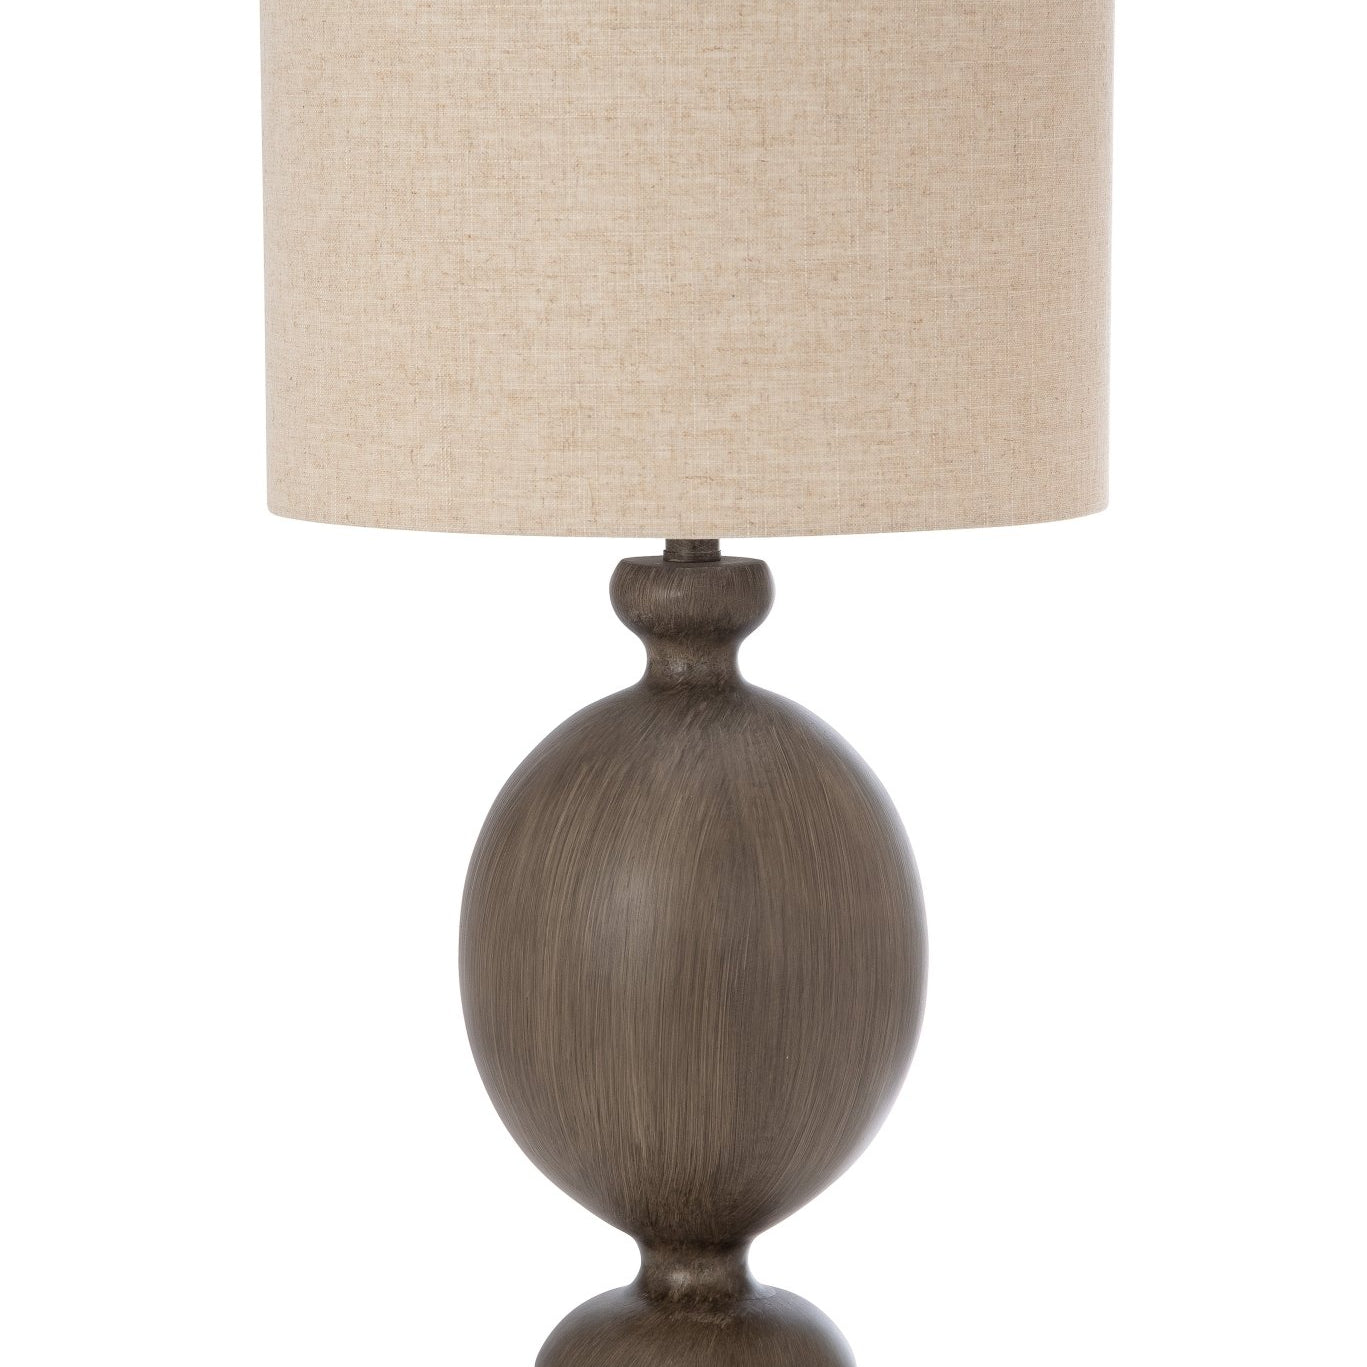 Wren-30-Inch-Distressed-Brown-Poly-Resin-Table-Lamp-(set-of-2)-Table-Lamps